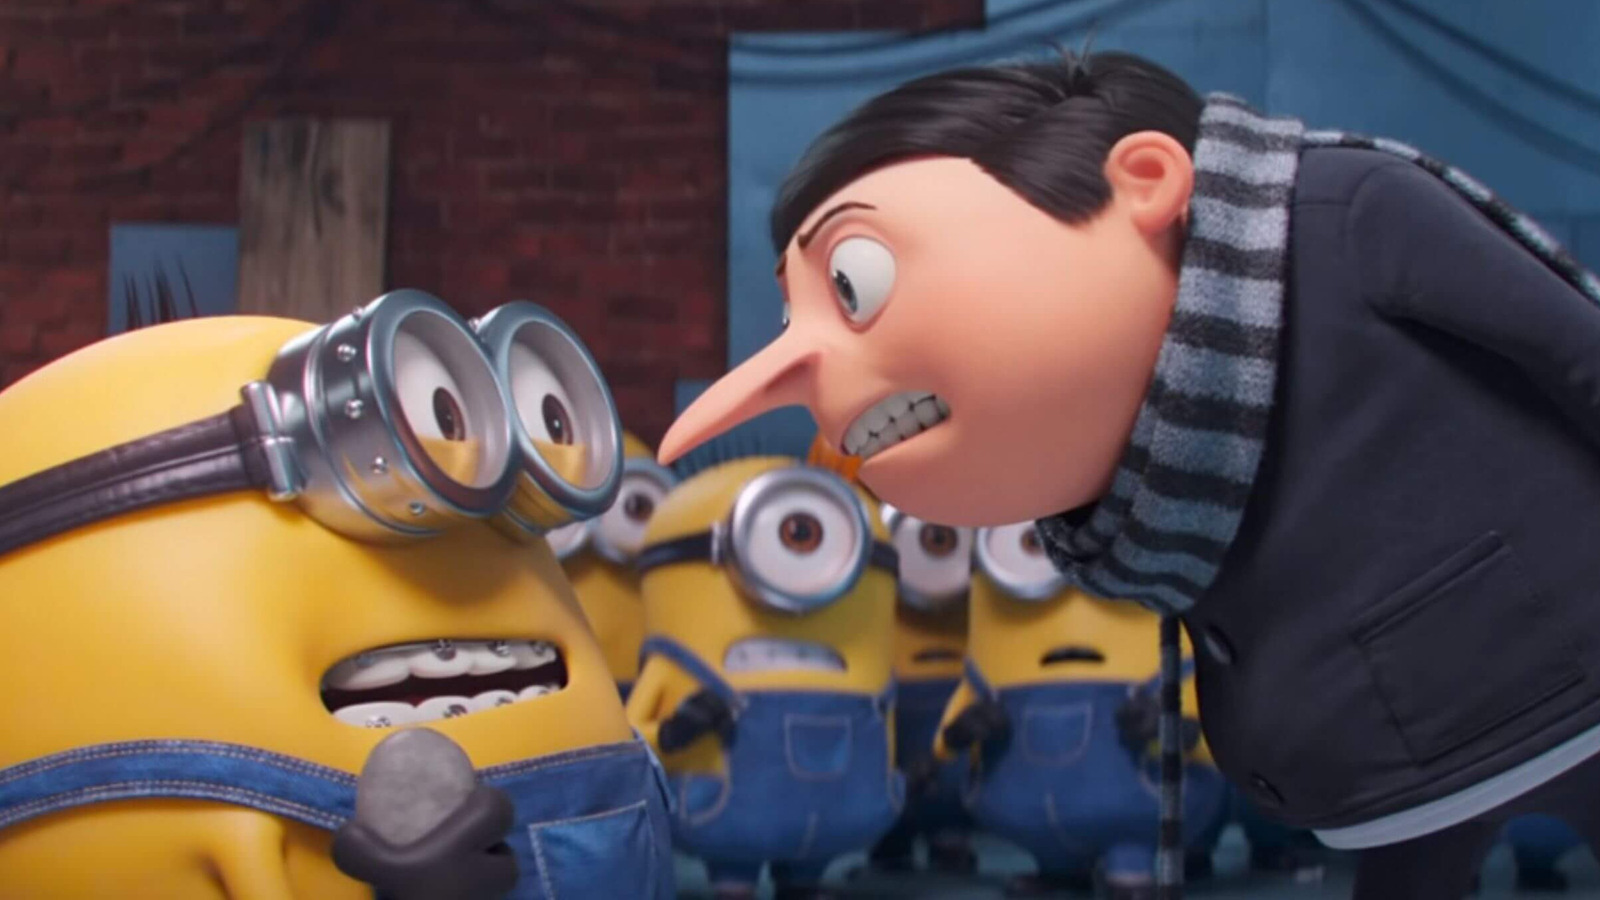 Minions: the Rise of Gru': the Gentleminions Suit Meme Explained